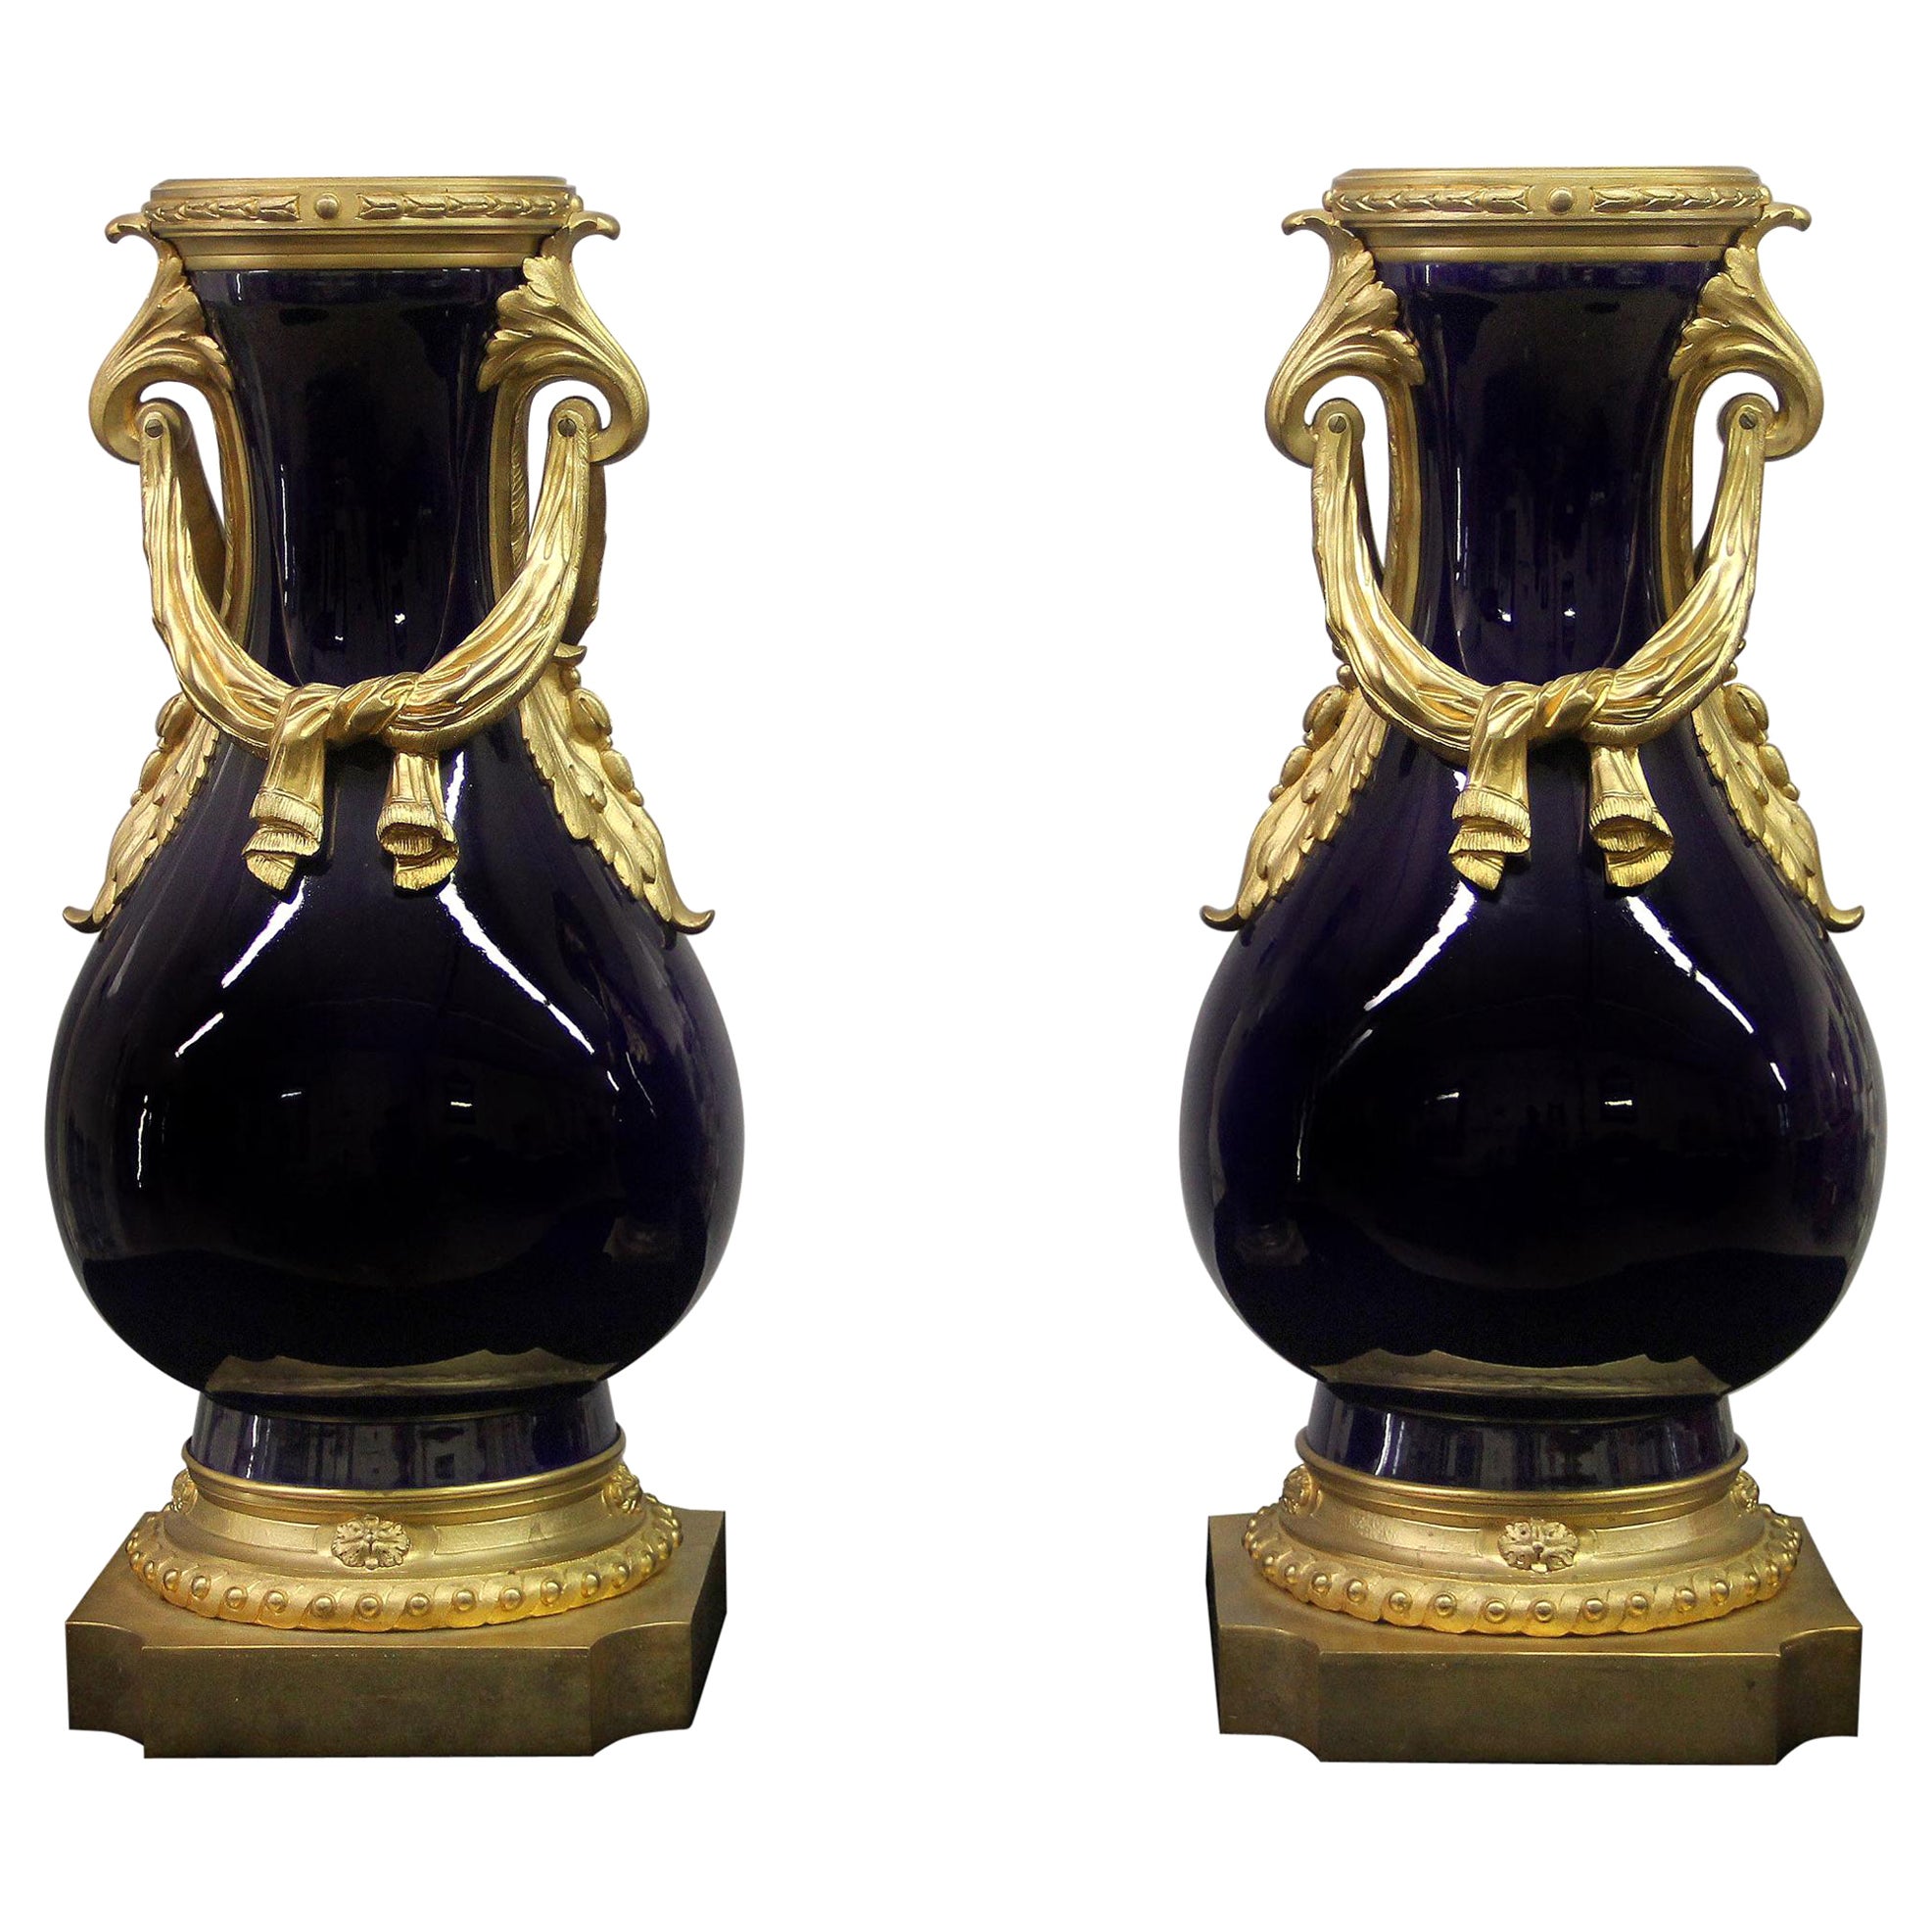 Fine Pair of Late 19th Century Gilt Bronze Mounted Sèvres Style Porcelain Vase